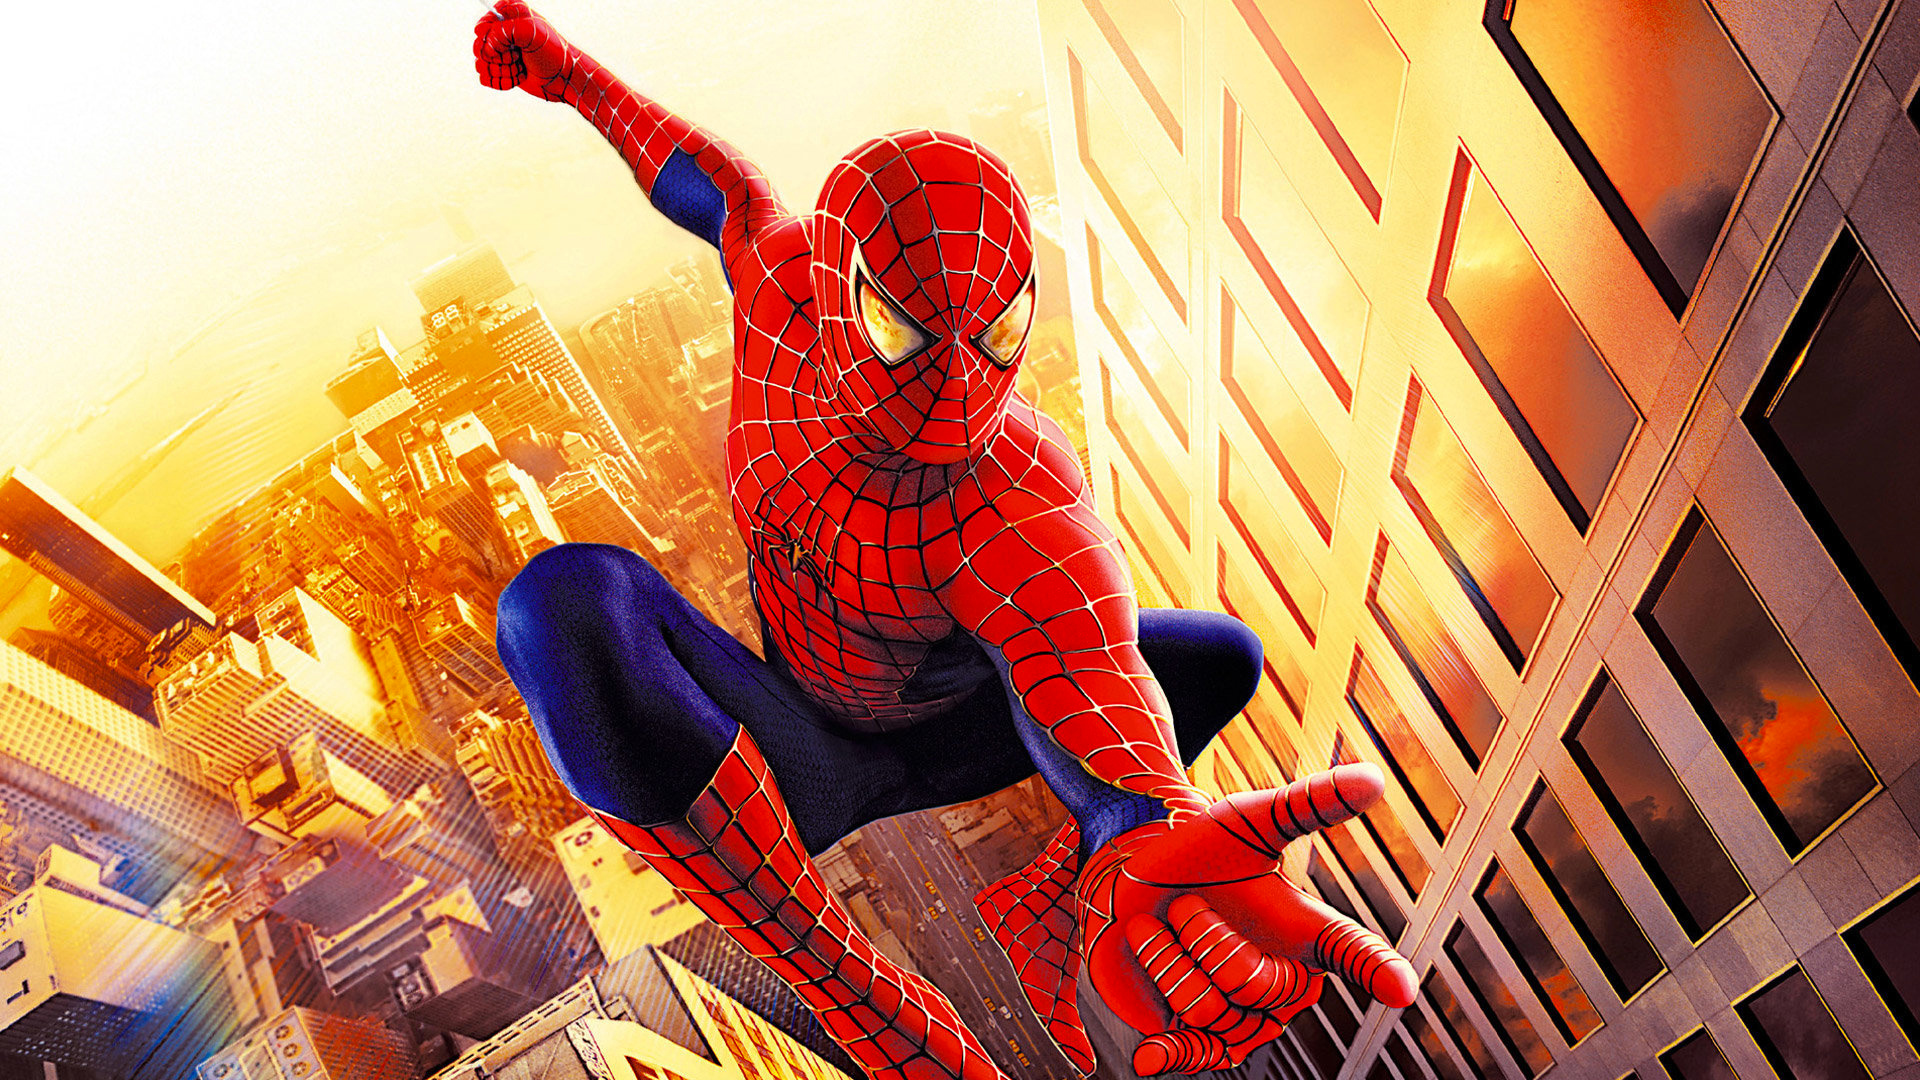 Spider-Man movies, Order, Tobey Maguire, Tom Holland, 1920x1080 Full HD Desktop